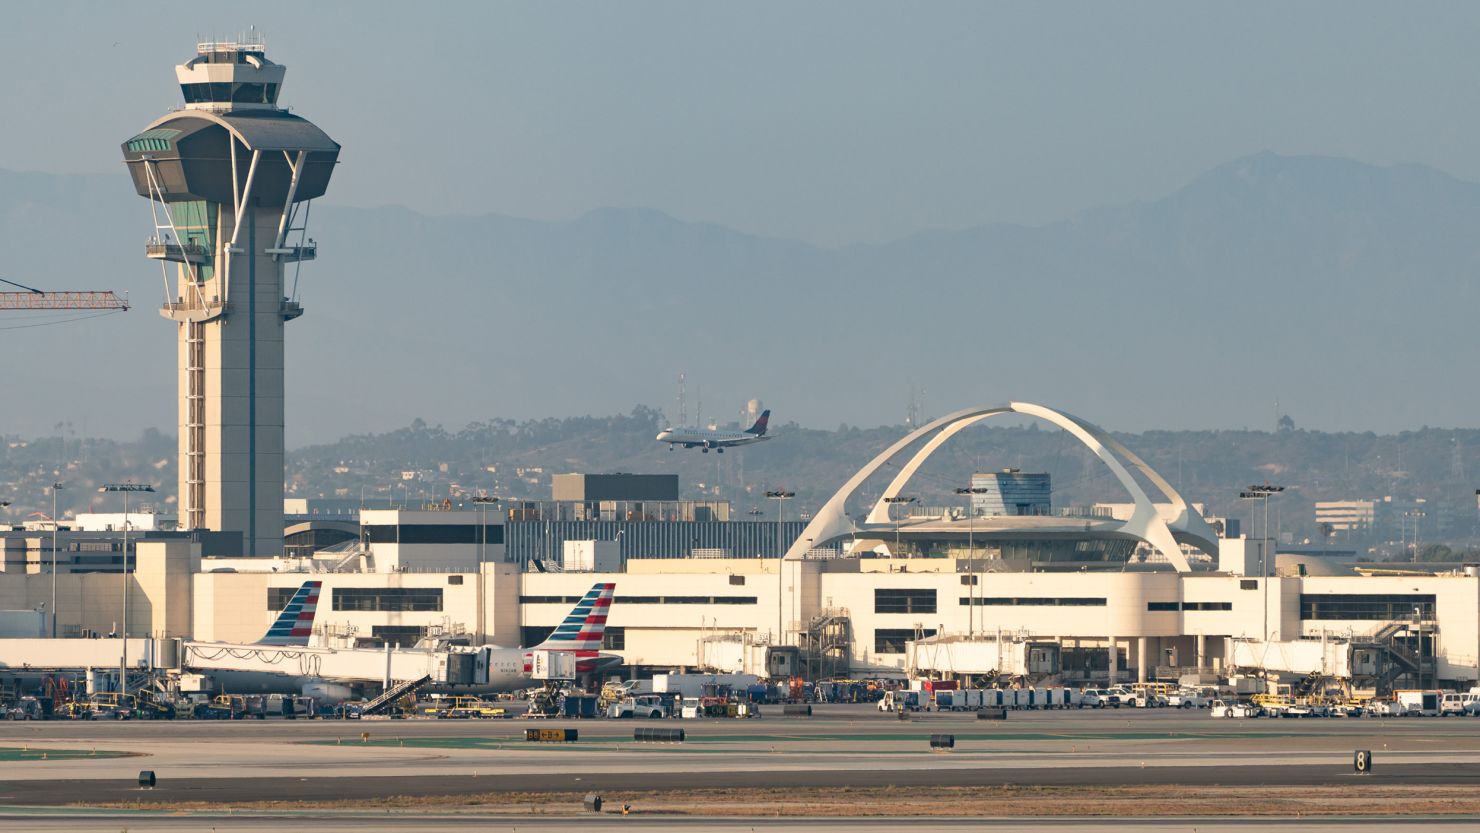 Air traffic controllers warned pilots that a person in a jetpack was spotted flying near LAX.